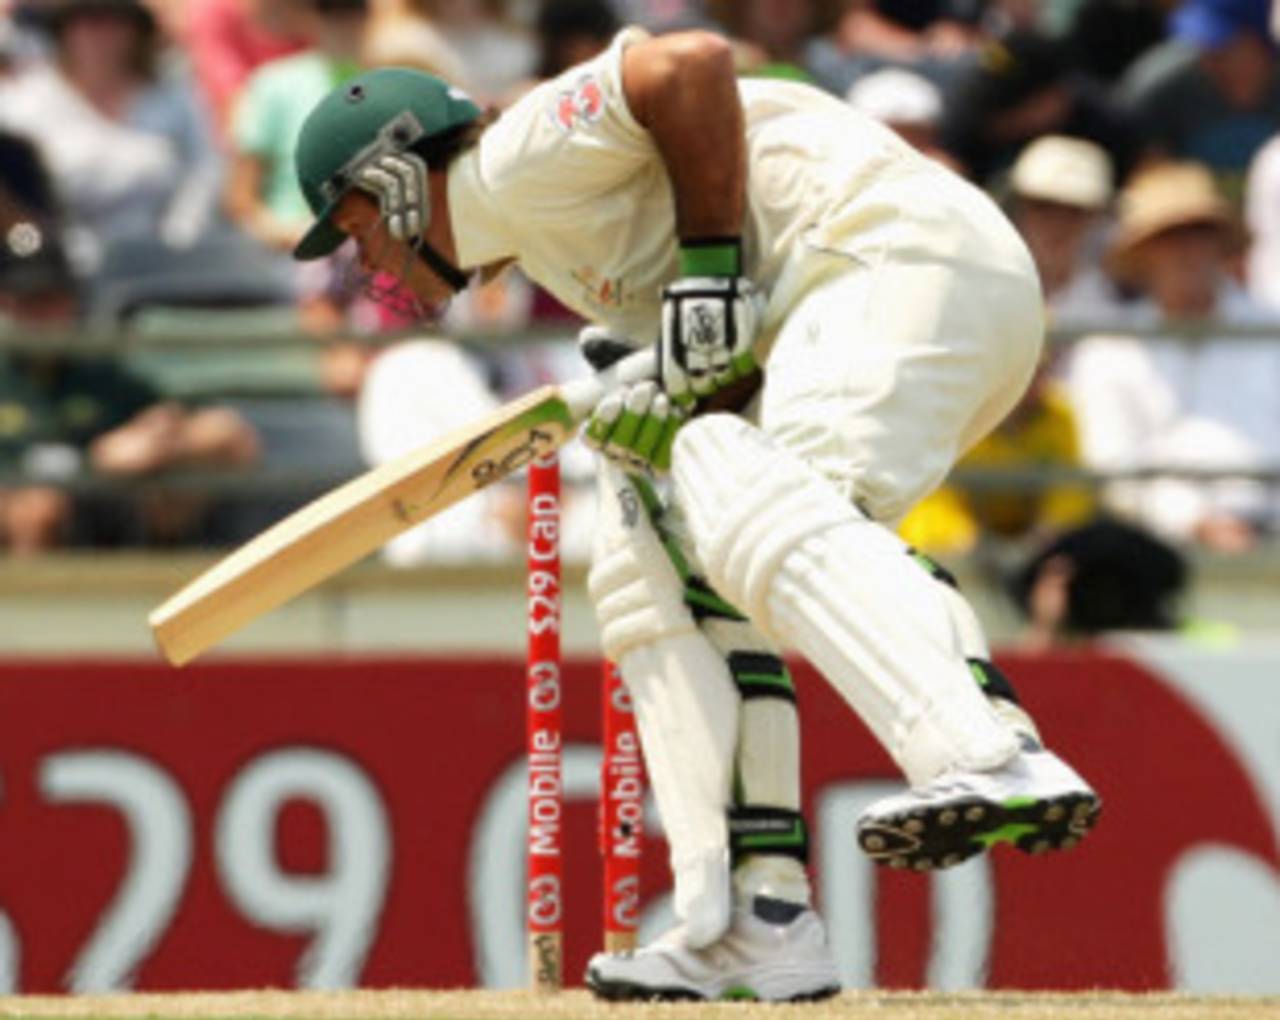 Ricky Ponting is hit on the left elbow by Kemar Roach, Australia v West Indies, 3rd Test, Perth, 16 December 2009